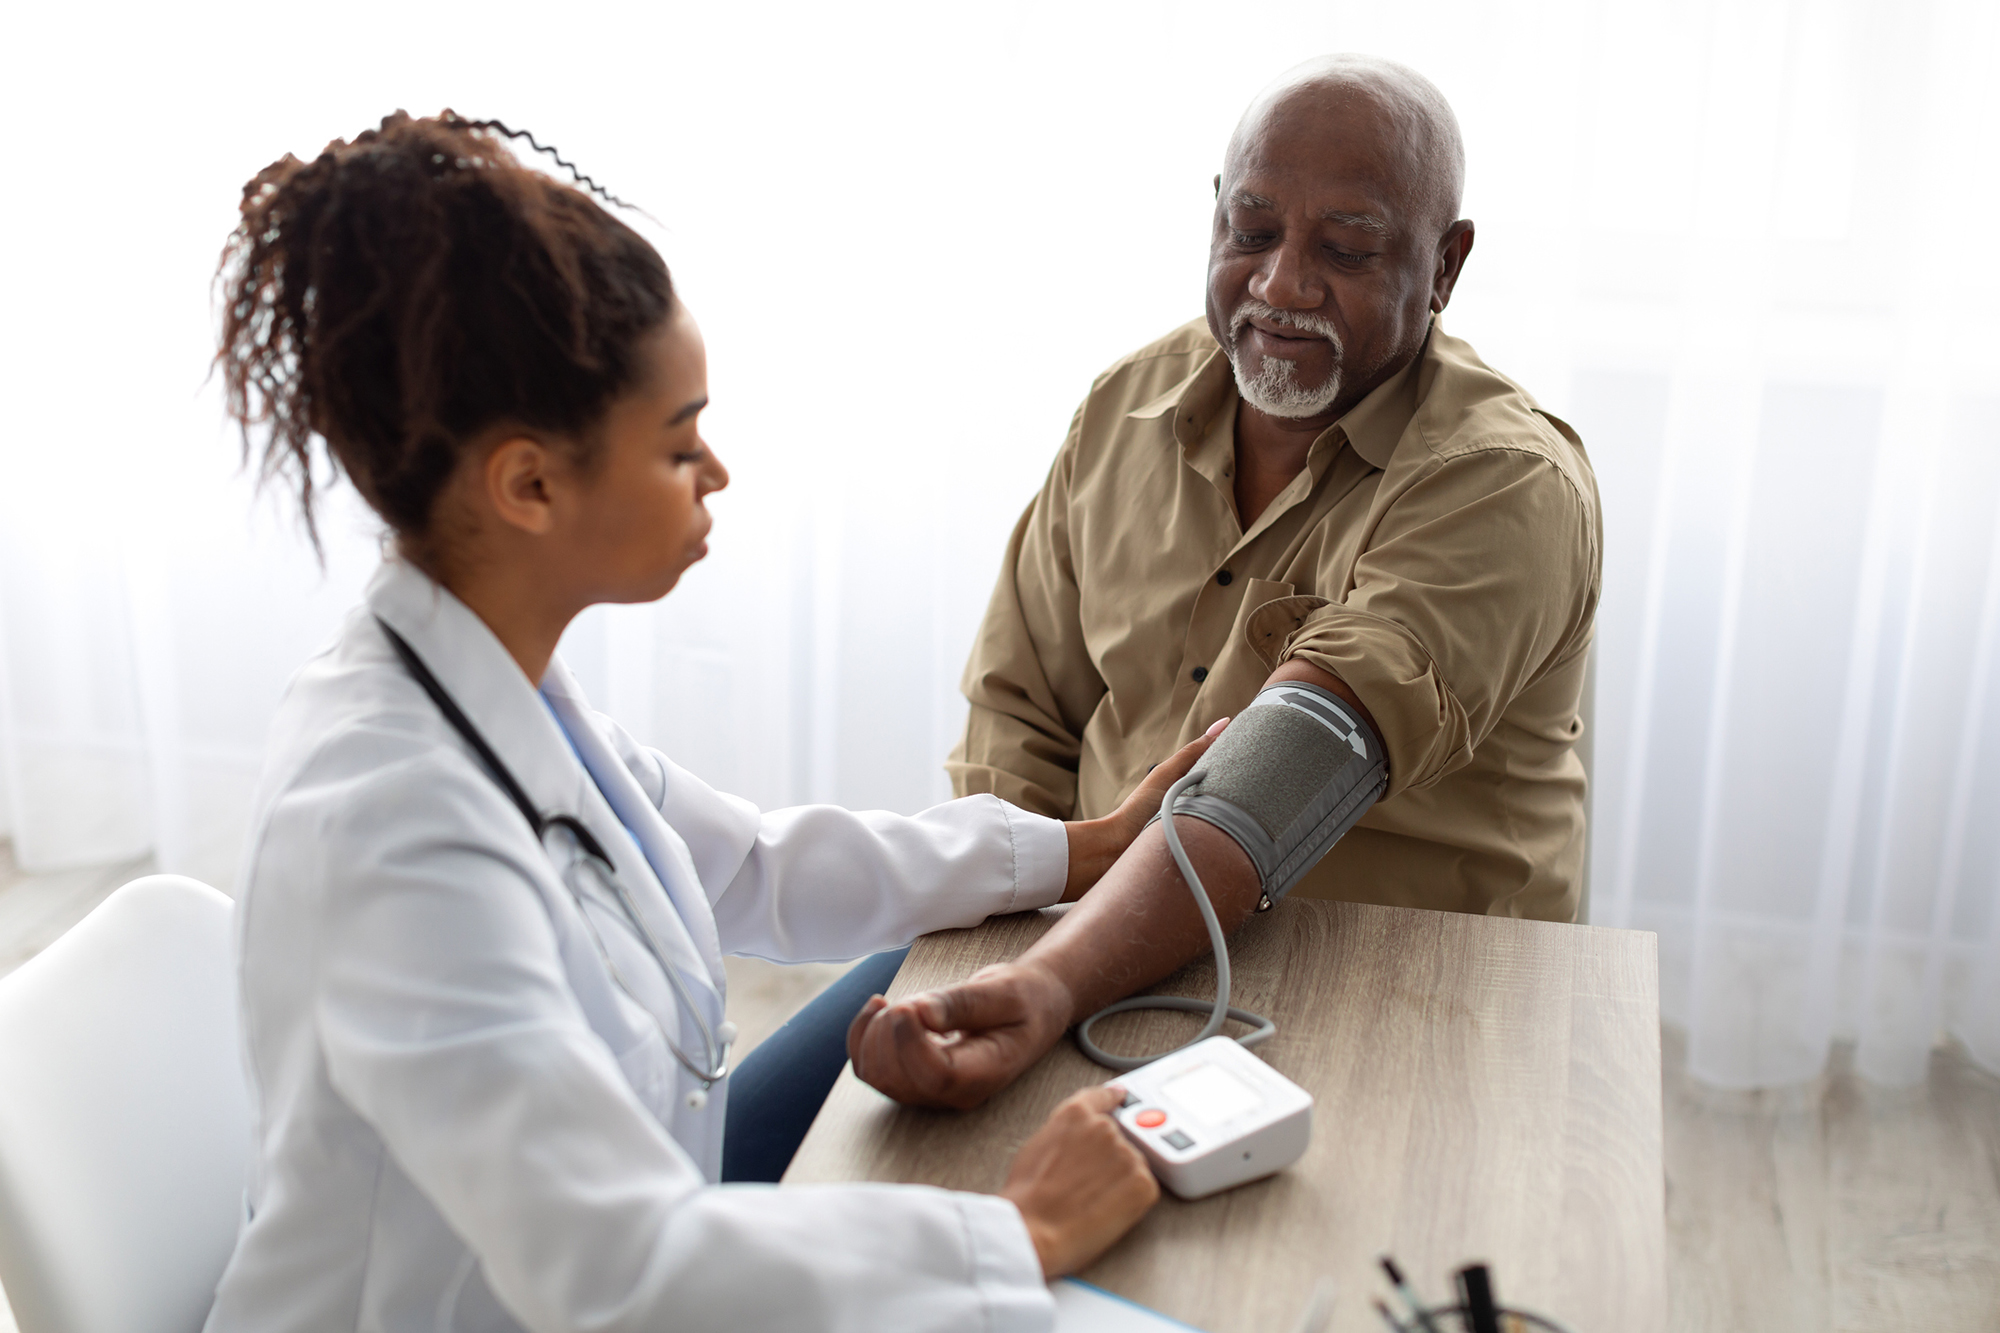 A medical professional takes the blood pressure of a mature patient.